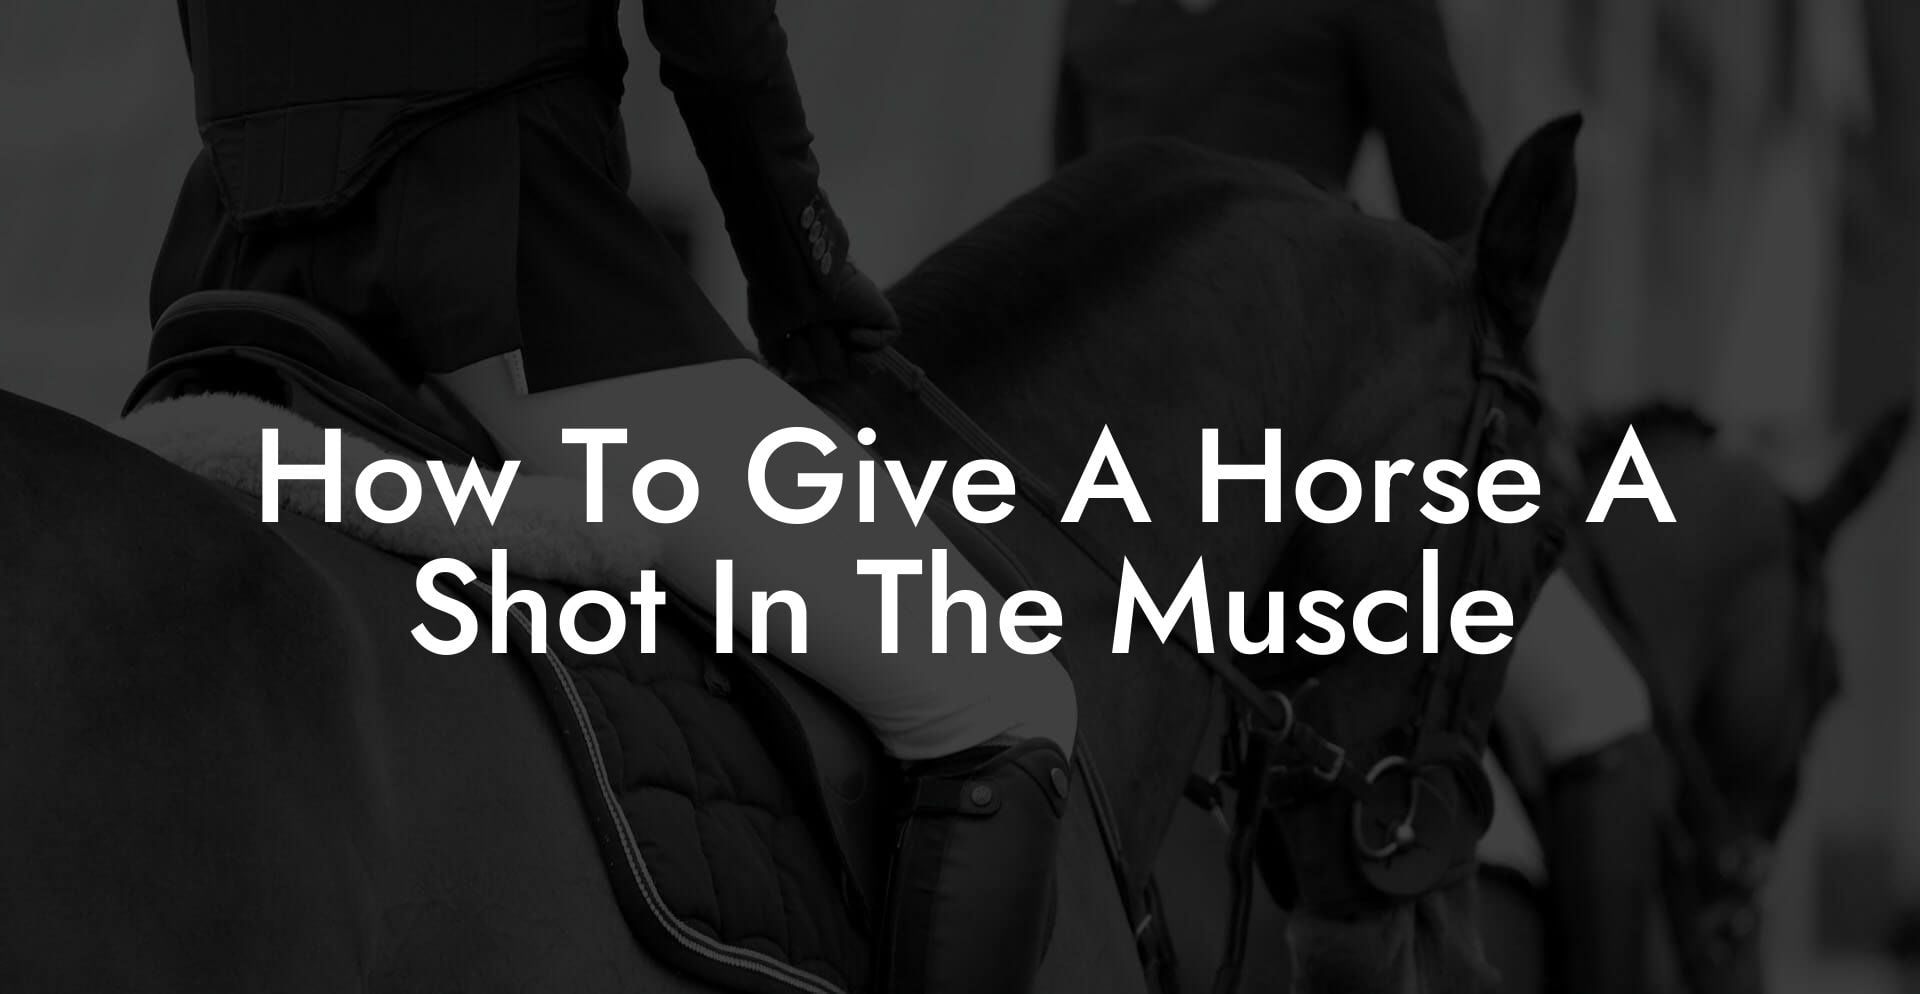 How To Give A Horse A Shot In The Muscle